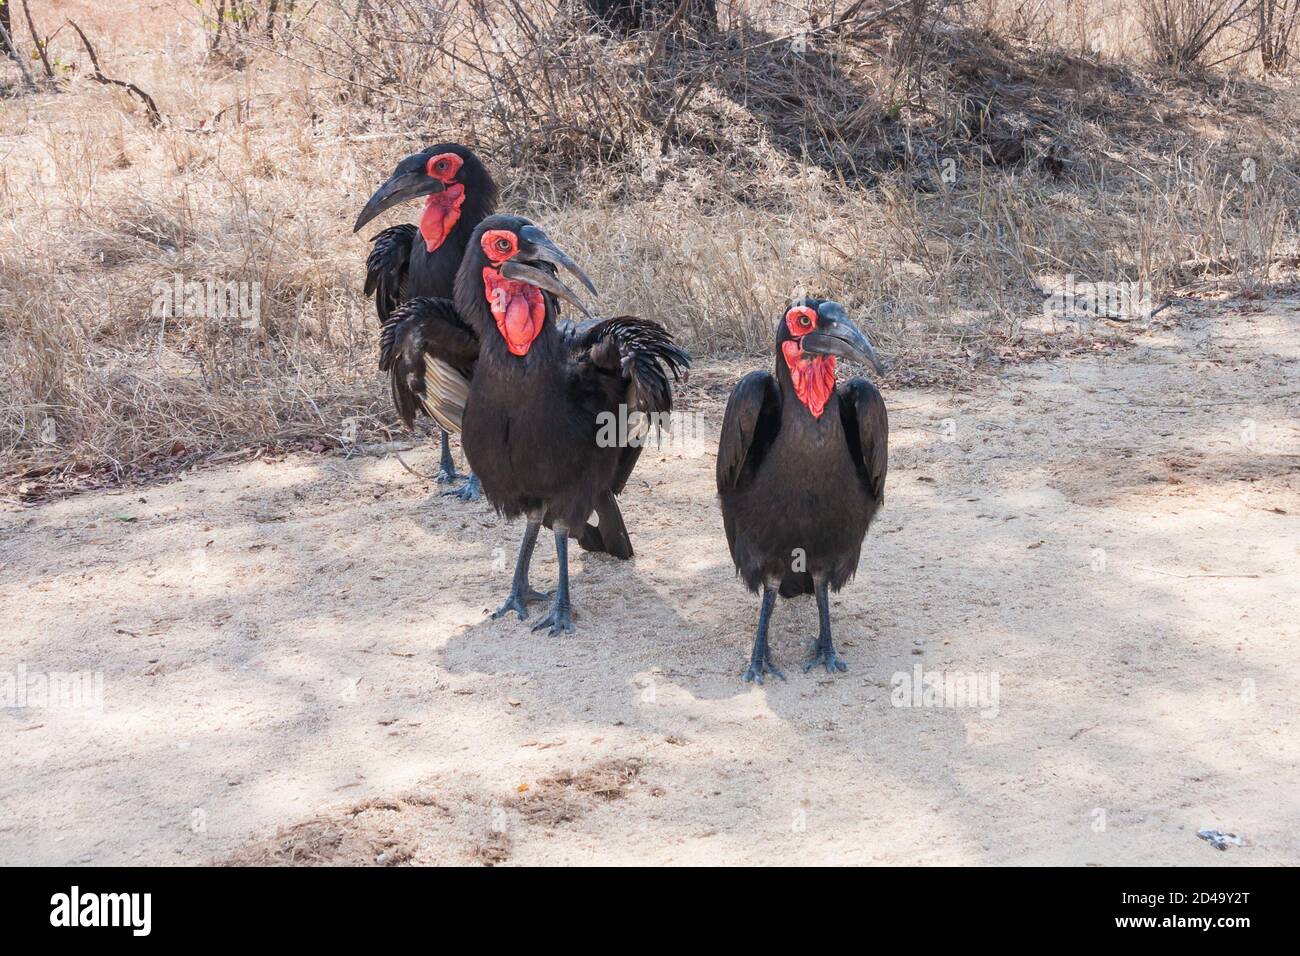 Southern ground hornbills (Bucorvus leadbeateri) group standing together in the road in Kruger National Park, South Africa Stock Photo